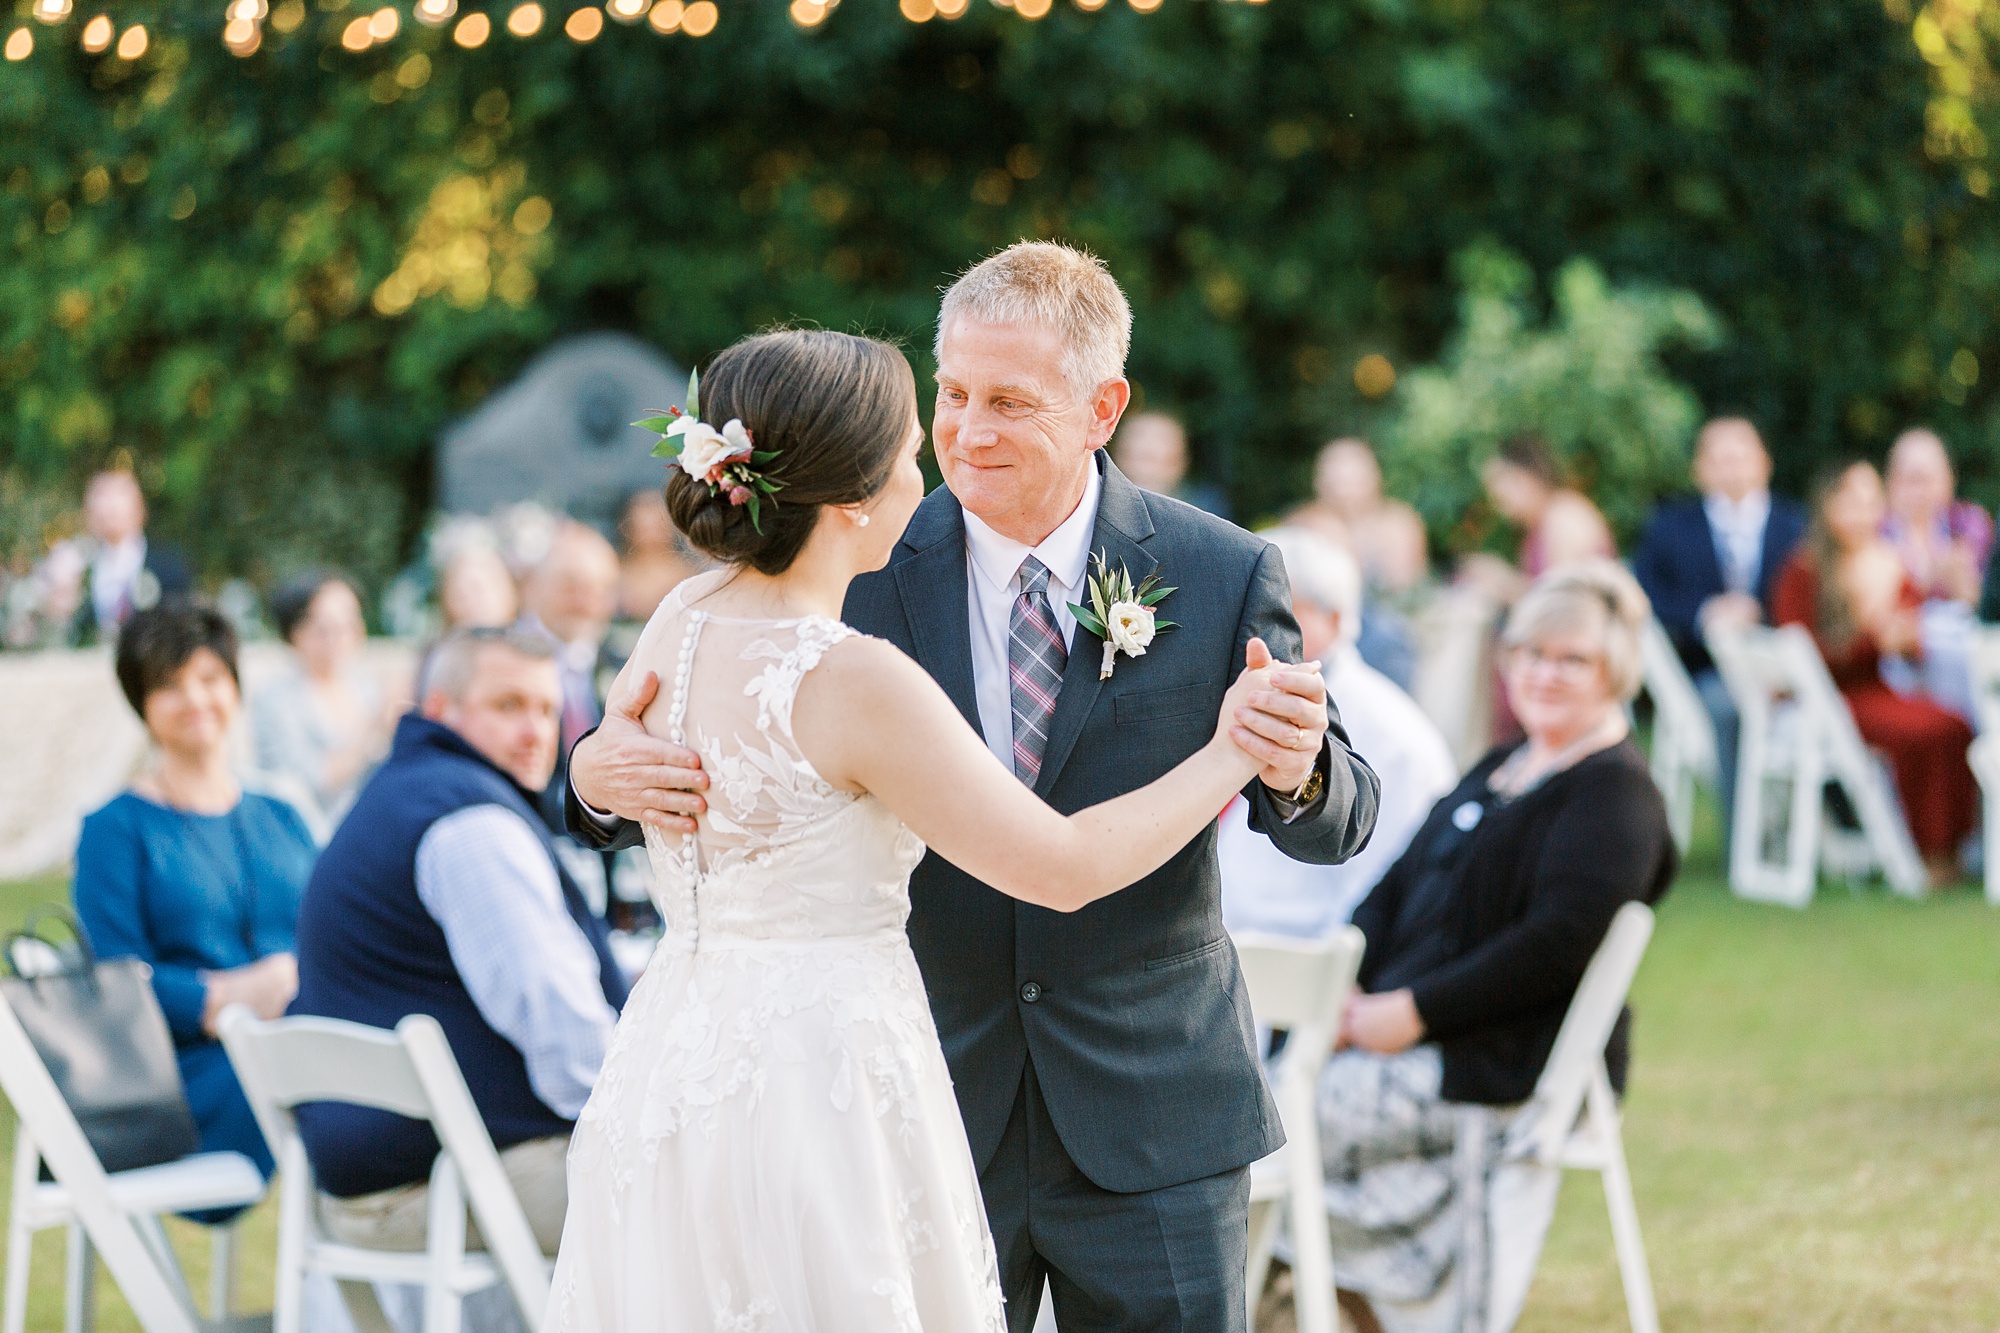 father-daughter dance during outdoor reception at Separk Mansion